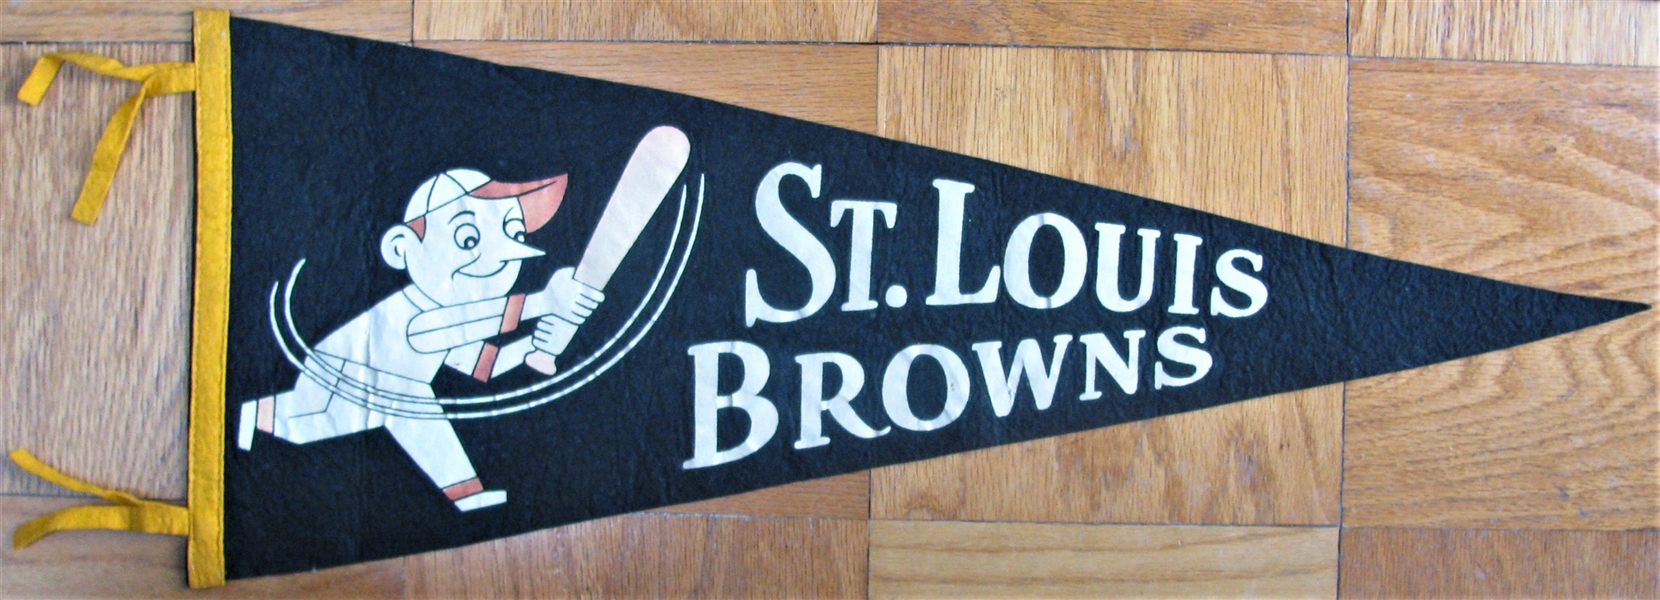 1940's ST. LOUIS BROWNS PENNANT